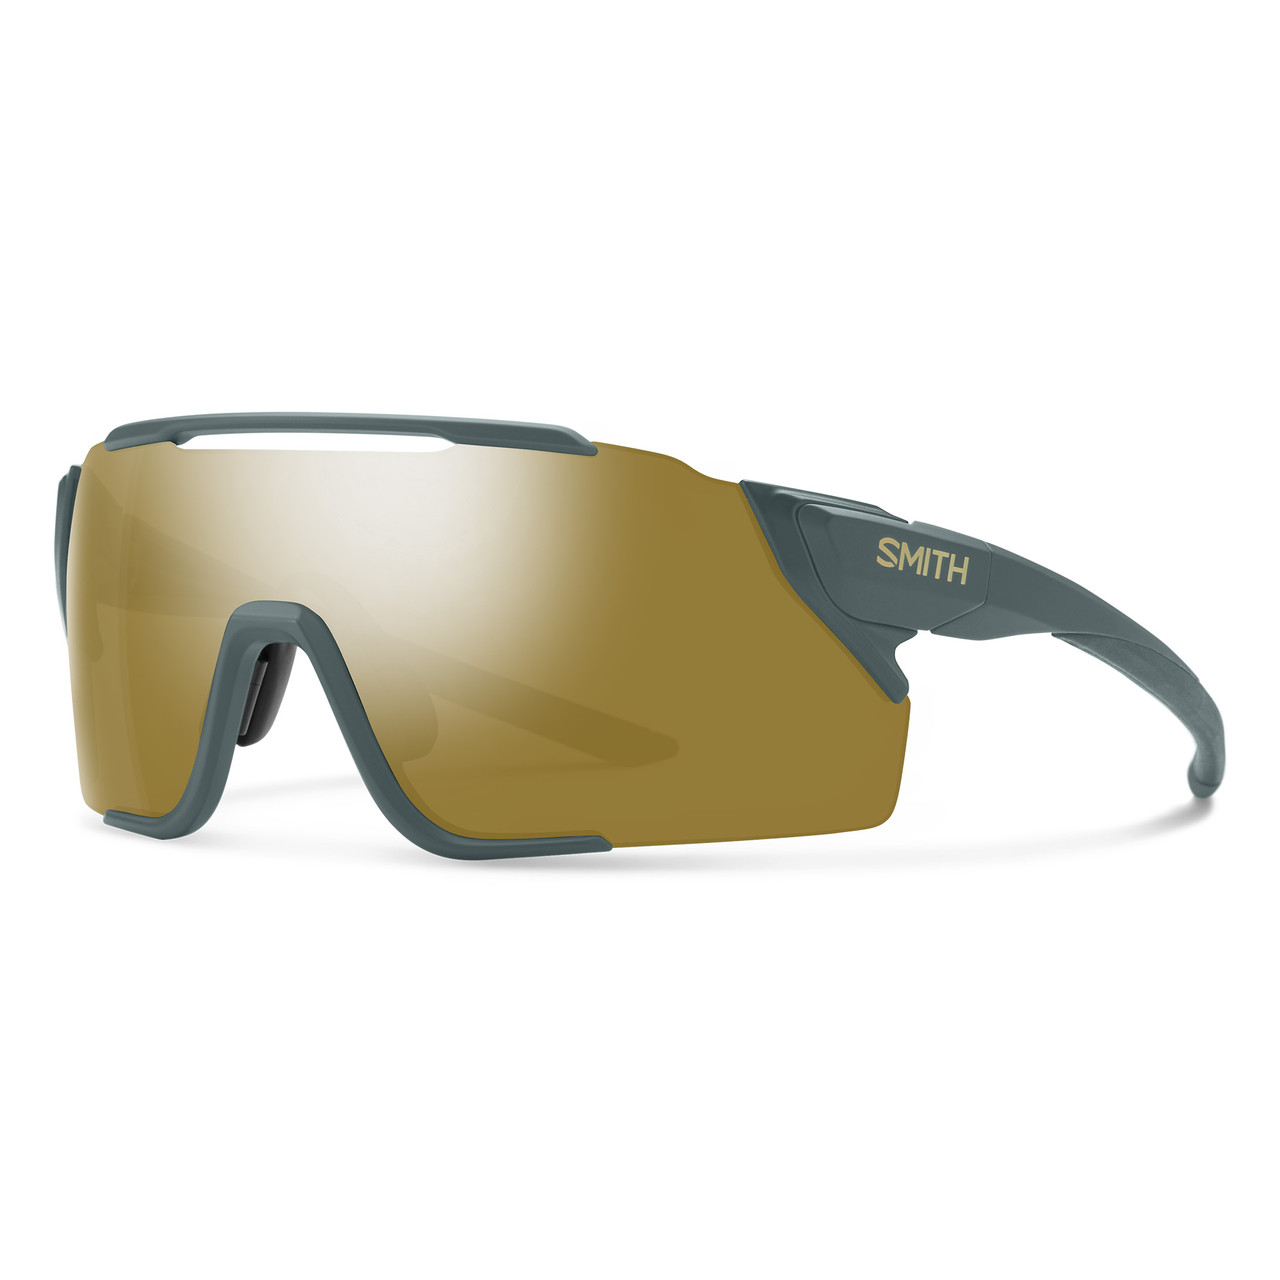 Smith Attack MAG MTB Wrap Sunglasses in Matte Spruce Green/CP Bronze/Amber  172mm